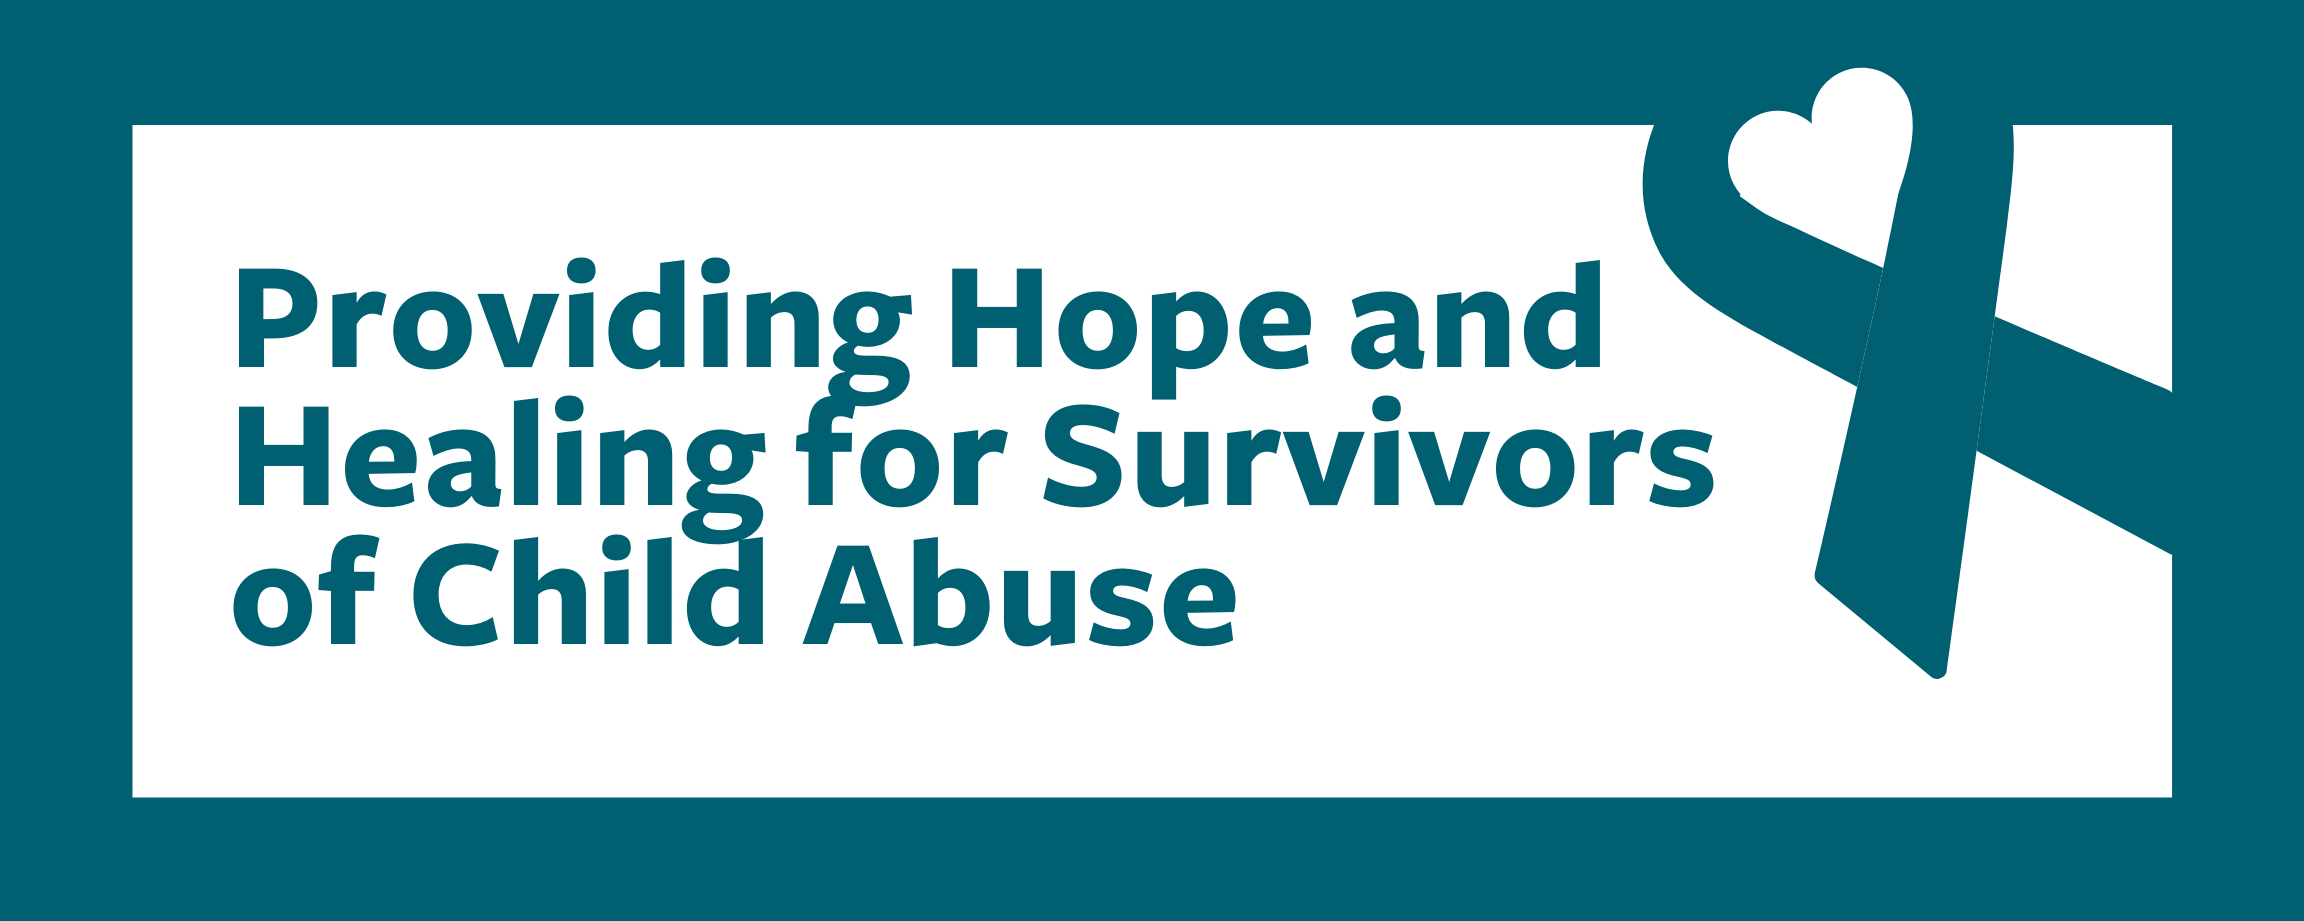 Providing Hope and Healing for Survivors of Child Abuse